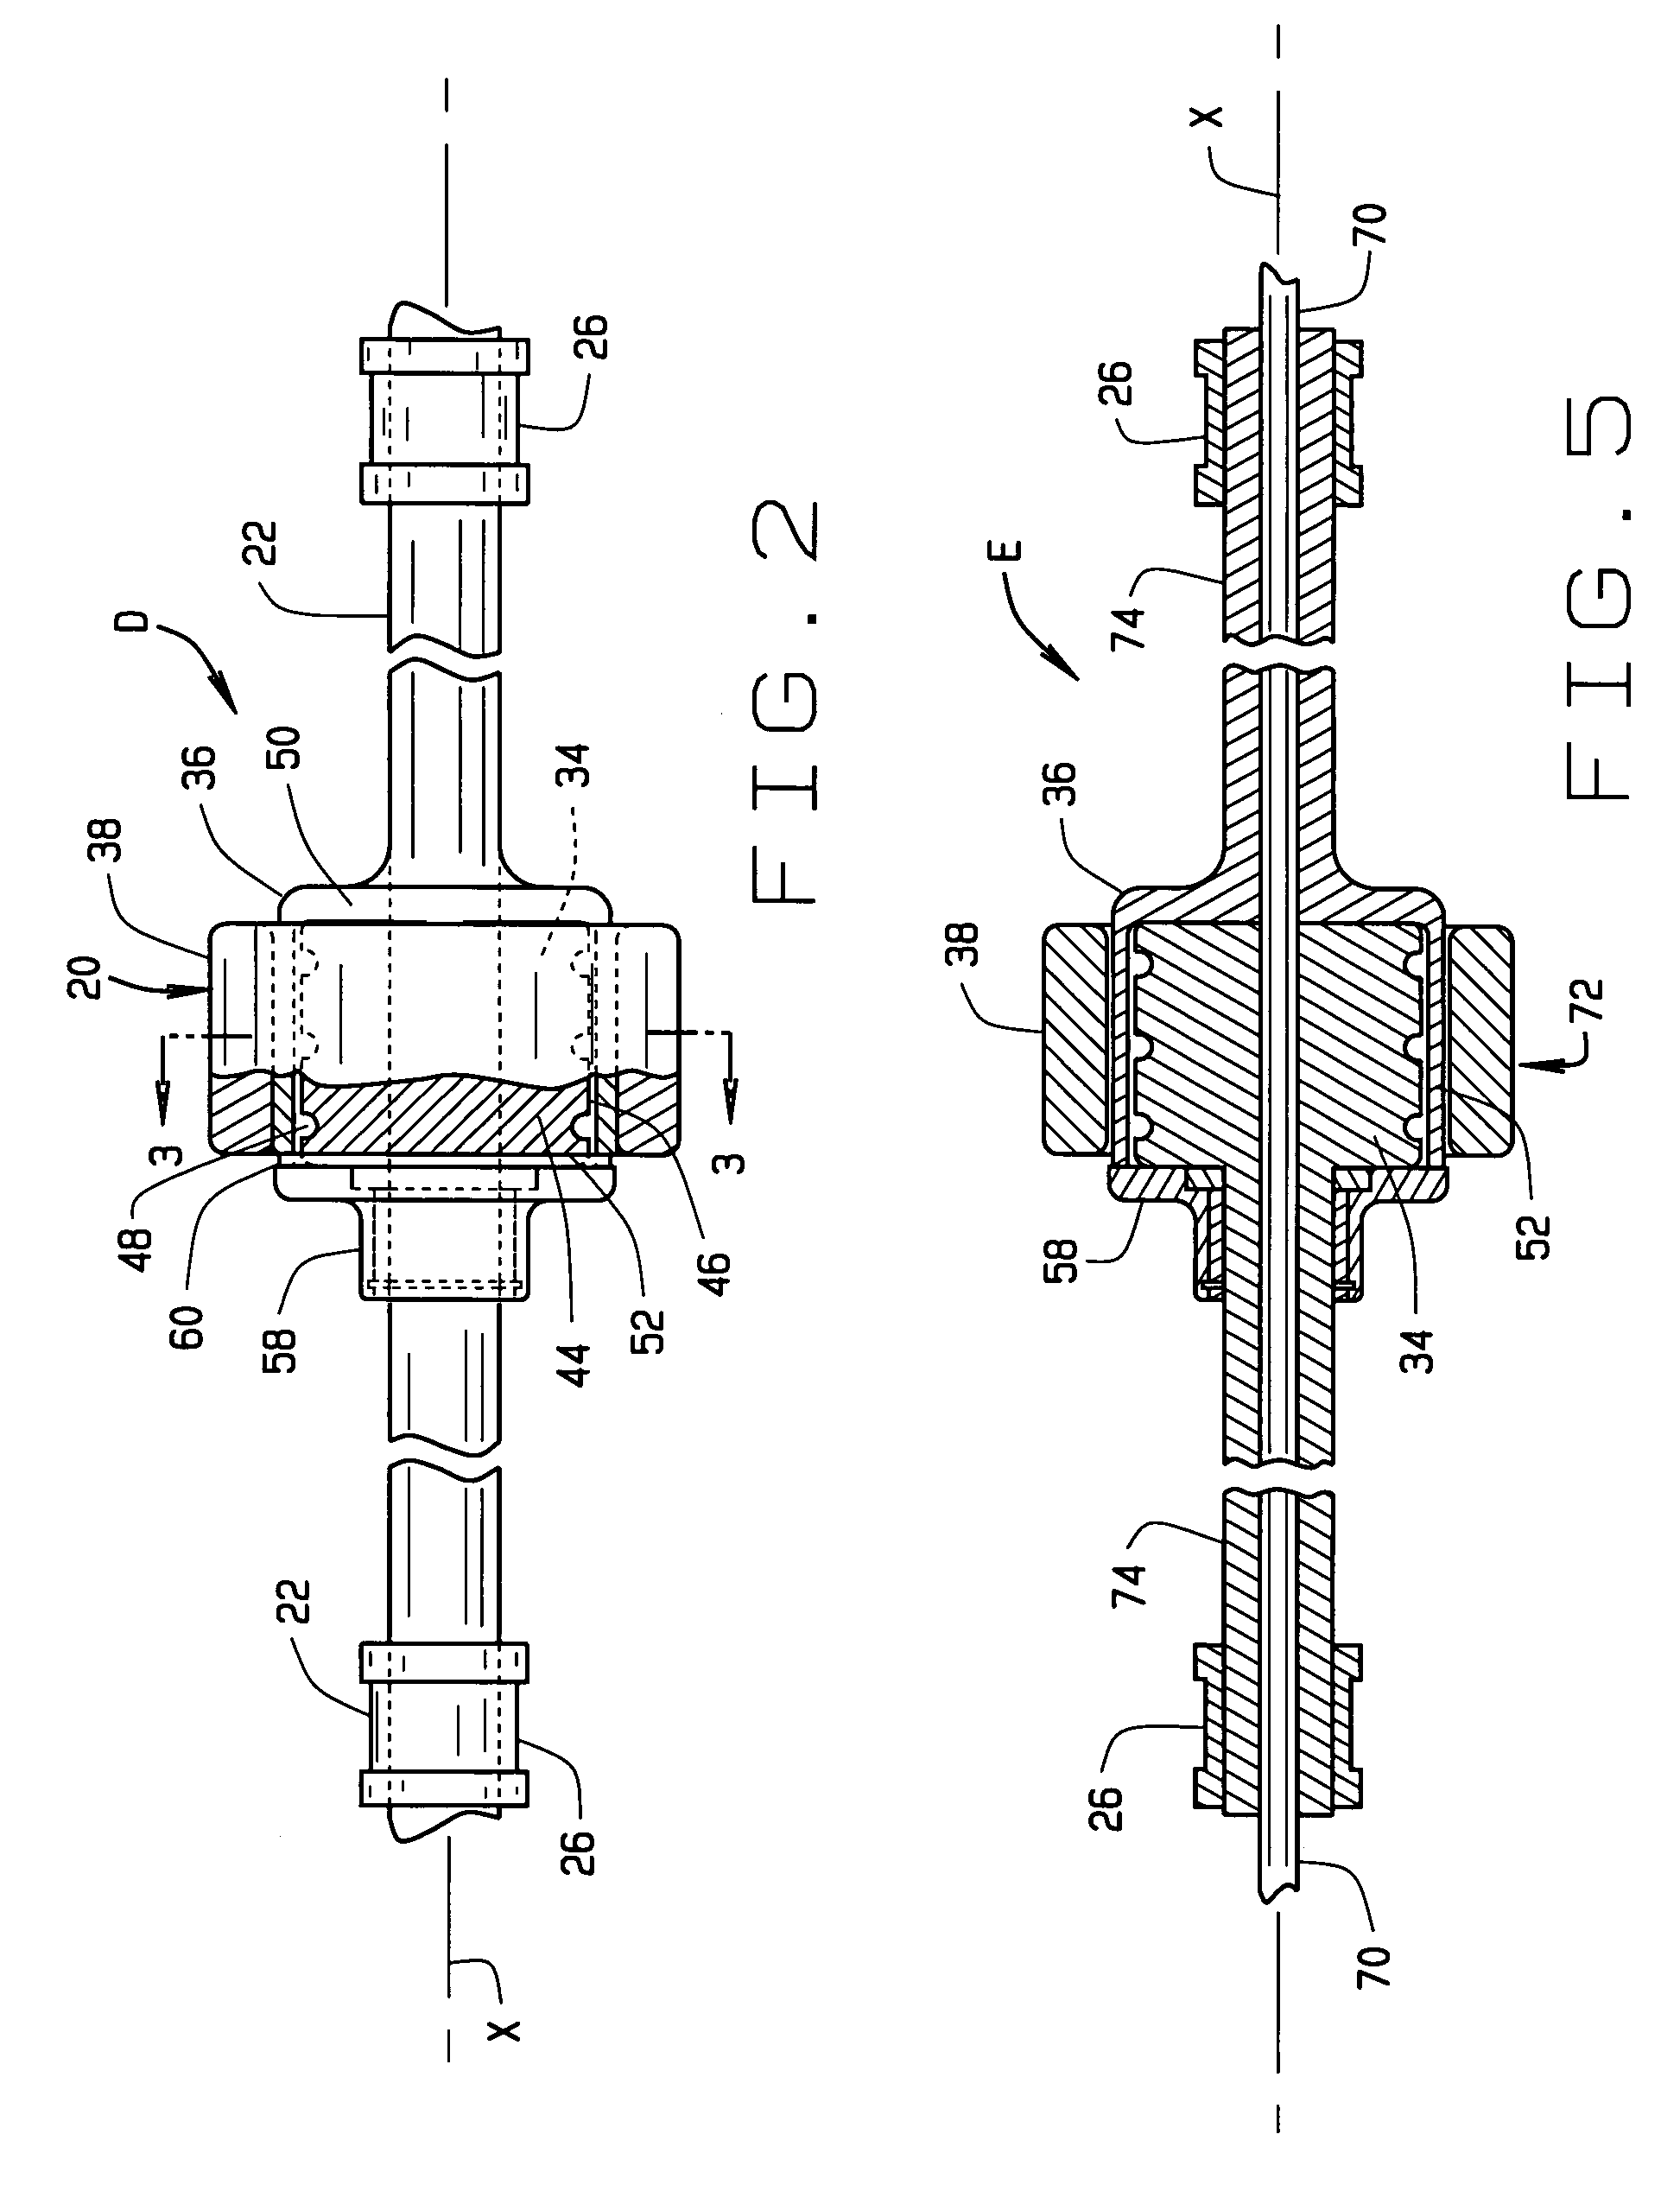 Stabilizer bar with variable torsional stiffness